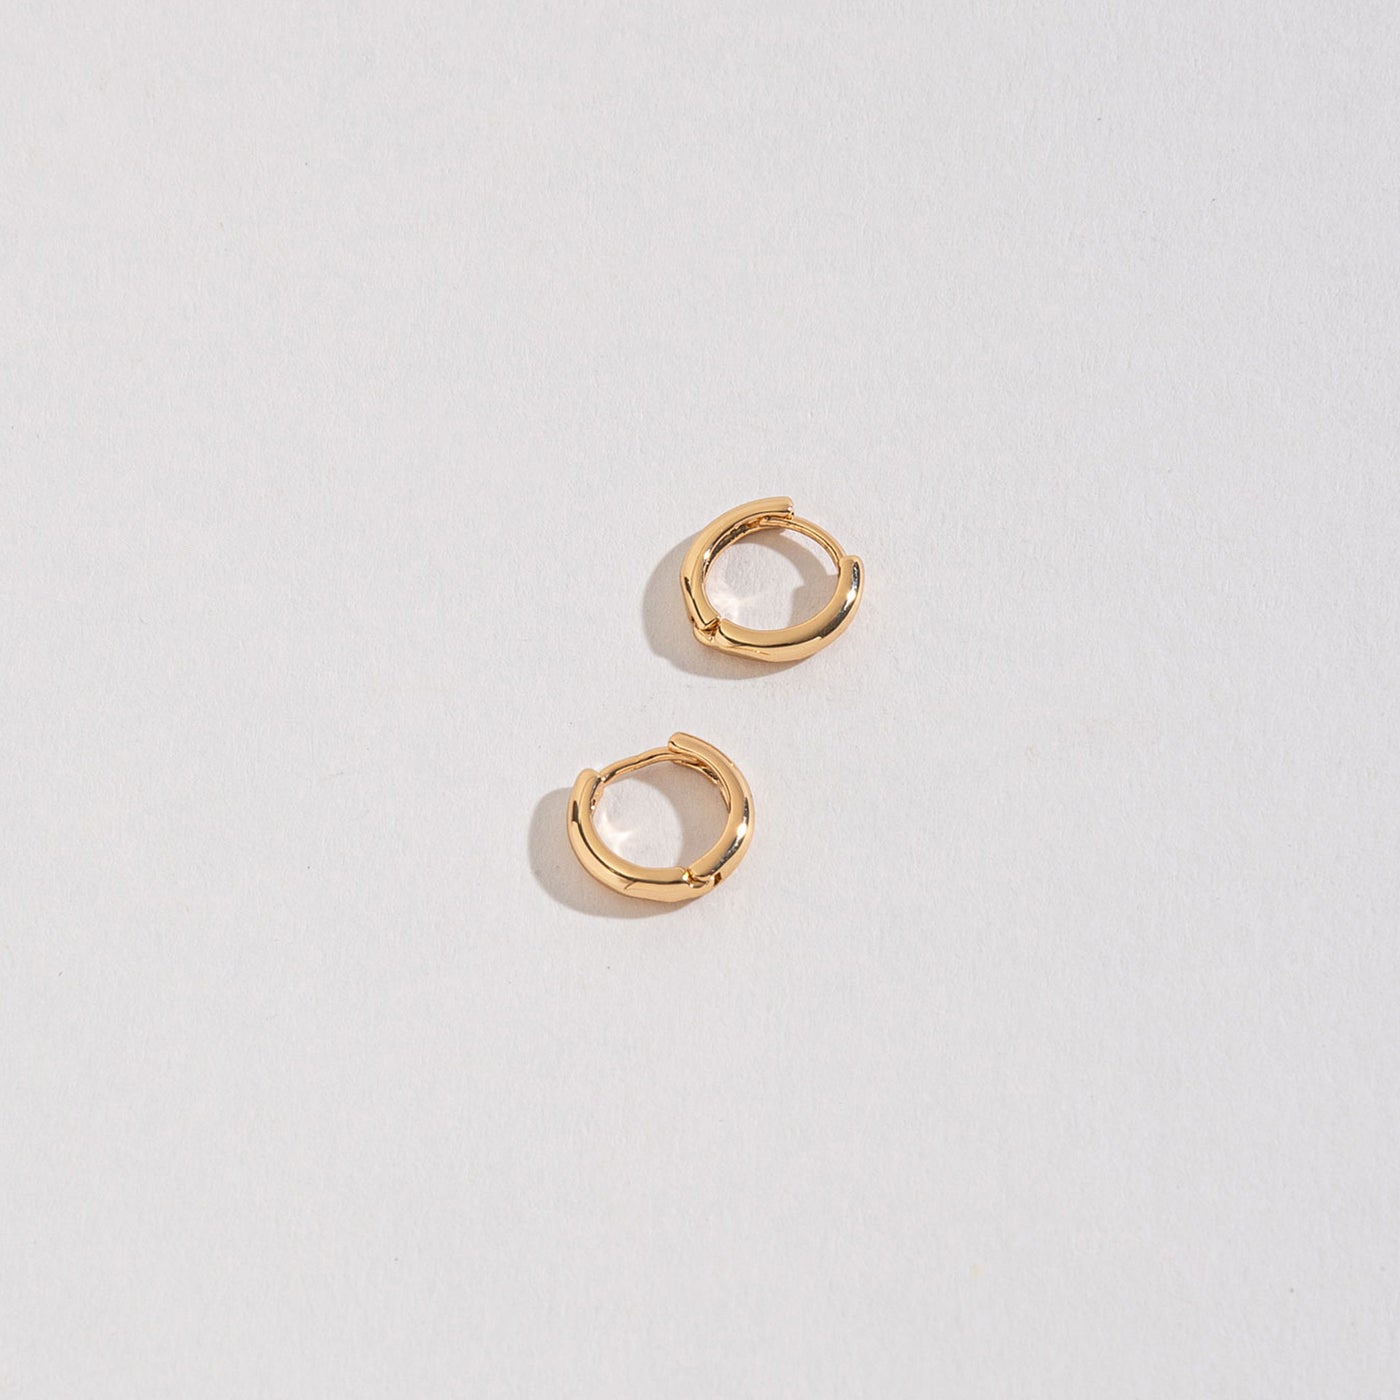 gold huggie hoops on a white background.